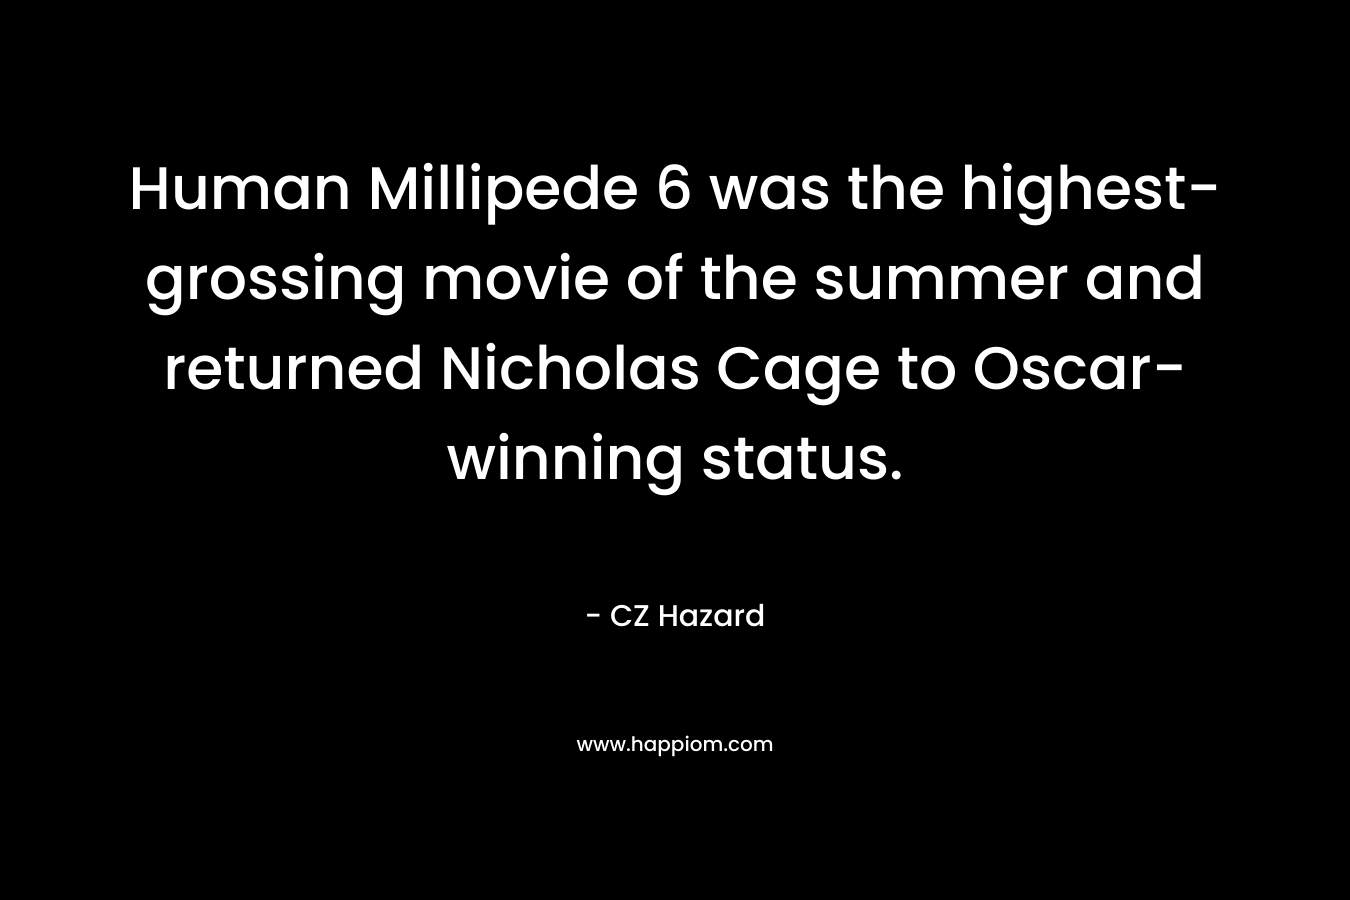 Human Millipede 6 was the highest-grossing movie of the summer and returned Nicholas Cage to Oscar-winning status. – CZ Hazard